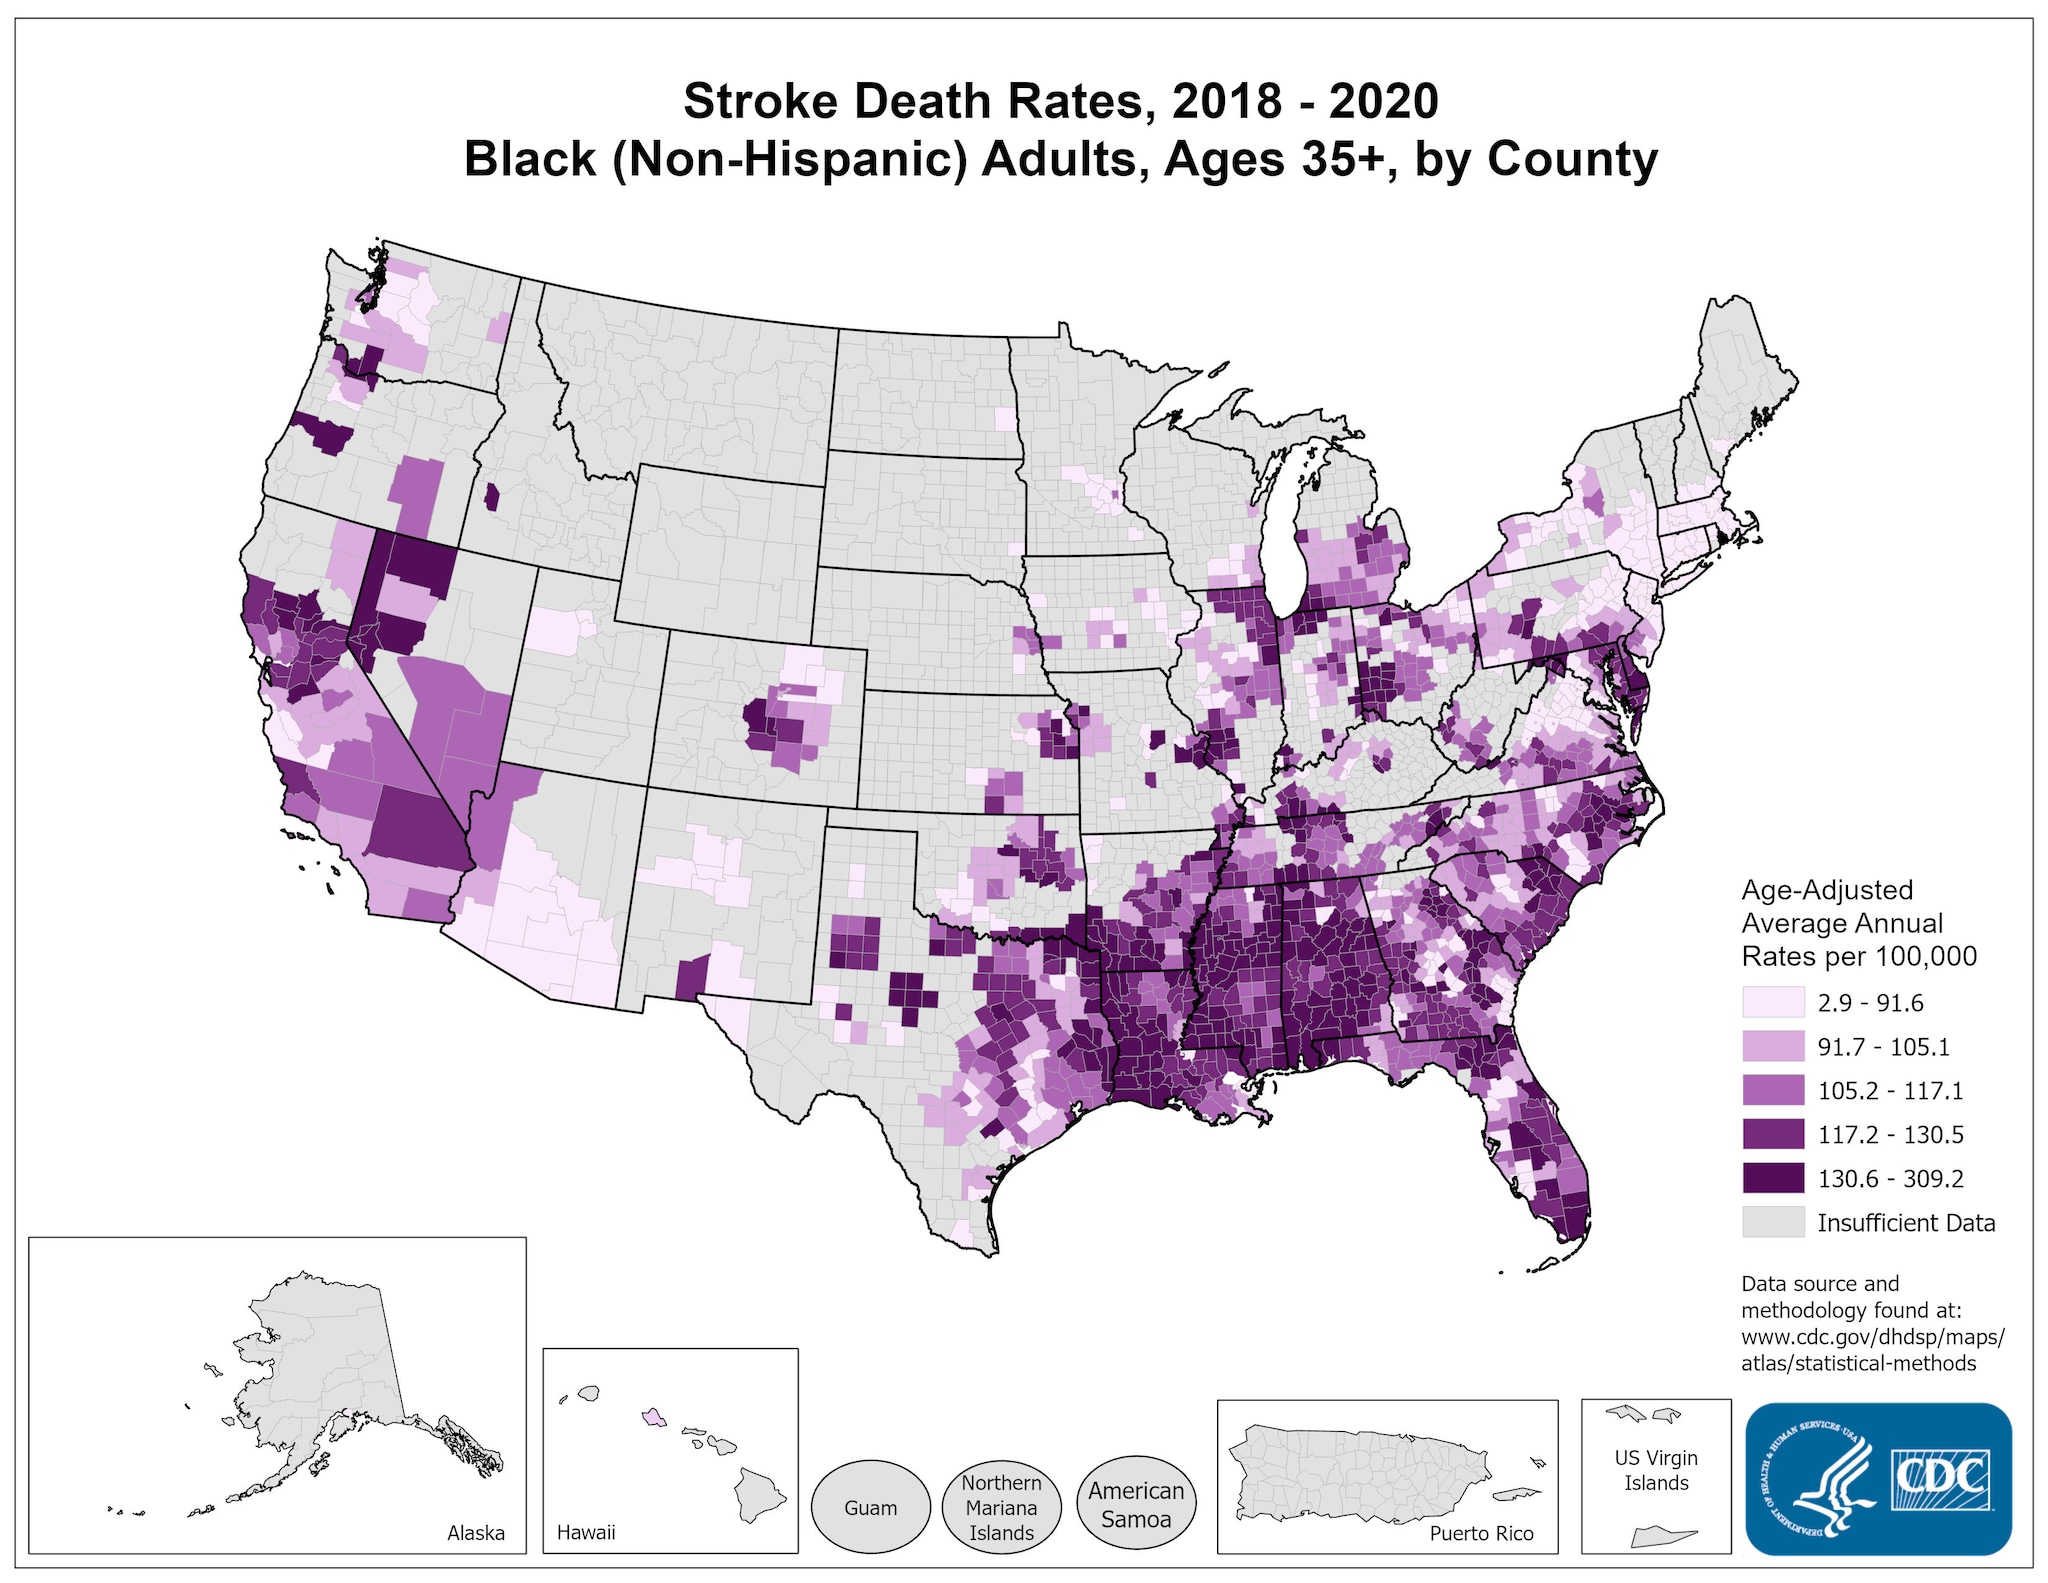 Stroke Death Rates for 2014 through 2016 for Blacks Aged 35 Years and Older by County. The map shows that concentrations of counties with the highest stroke death rates - meaning the top quintile - are located primarily in parts of Texas, Louisiana, Mississippi, Alabama, South Carolina, and Illinois. Pockets of high-rate counties also are found in West Virginia, Georgia, North Carolina, northern California, northern Washington state, Oklahoma and New York.